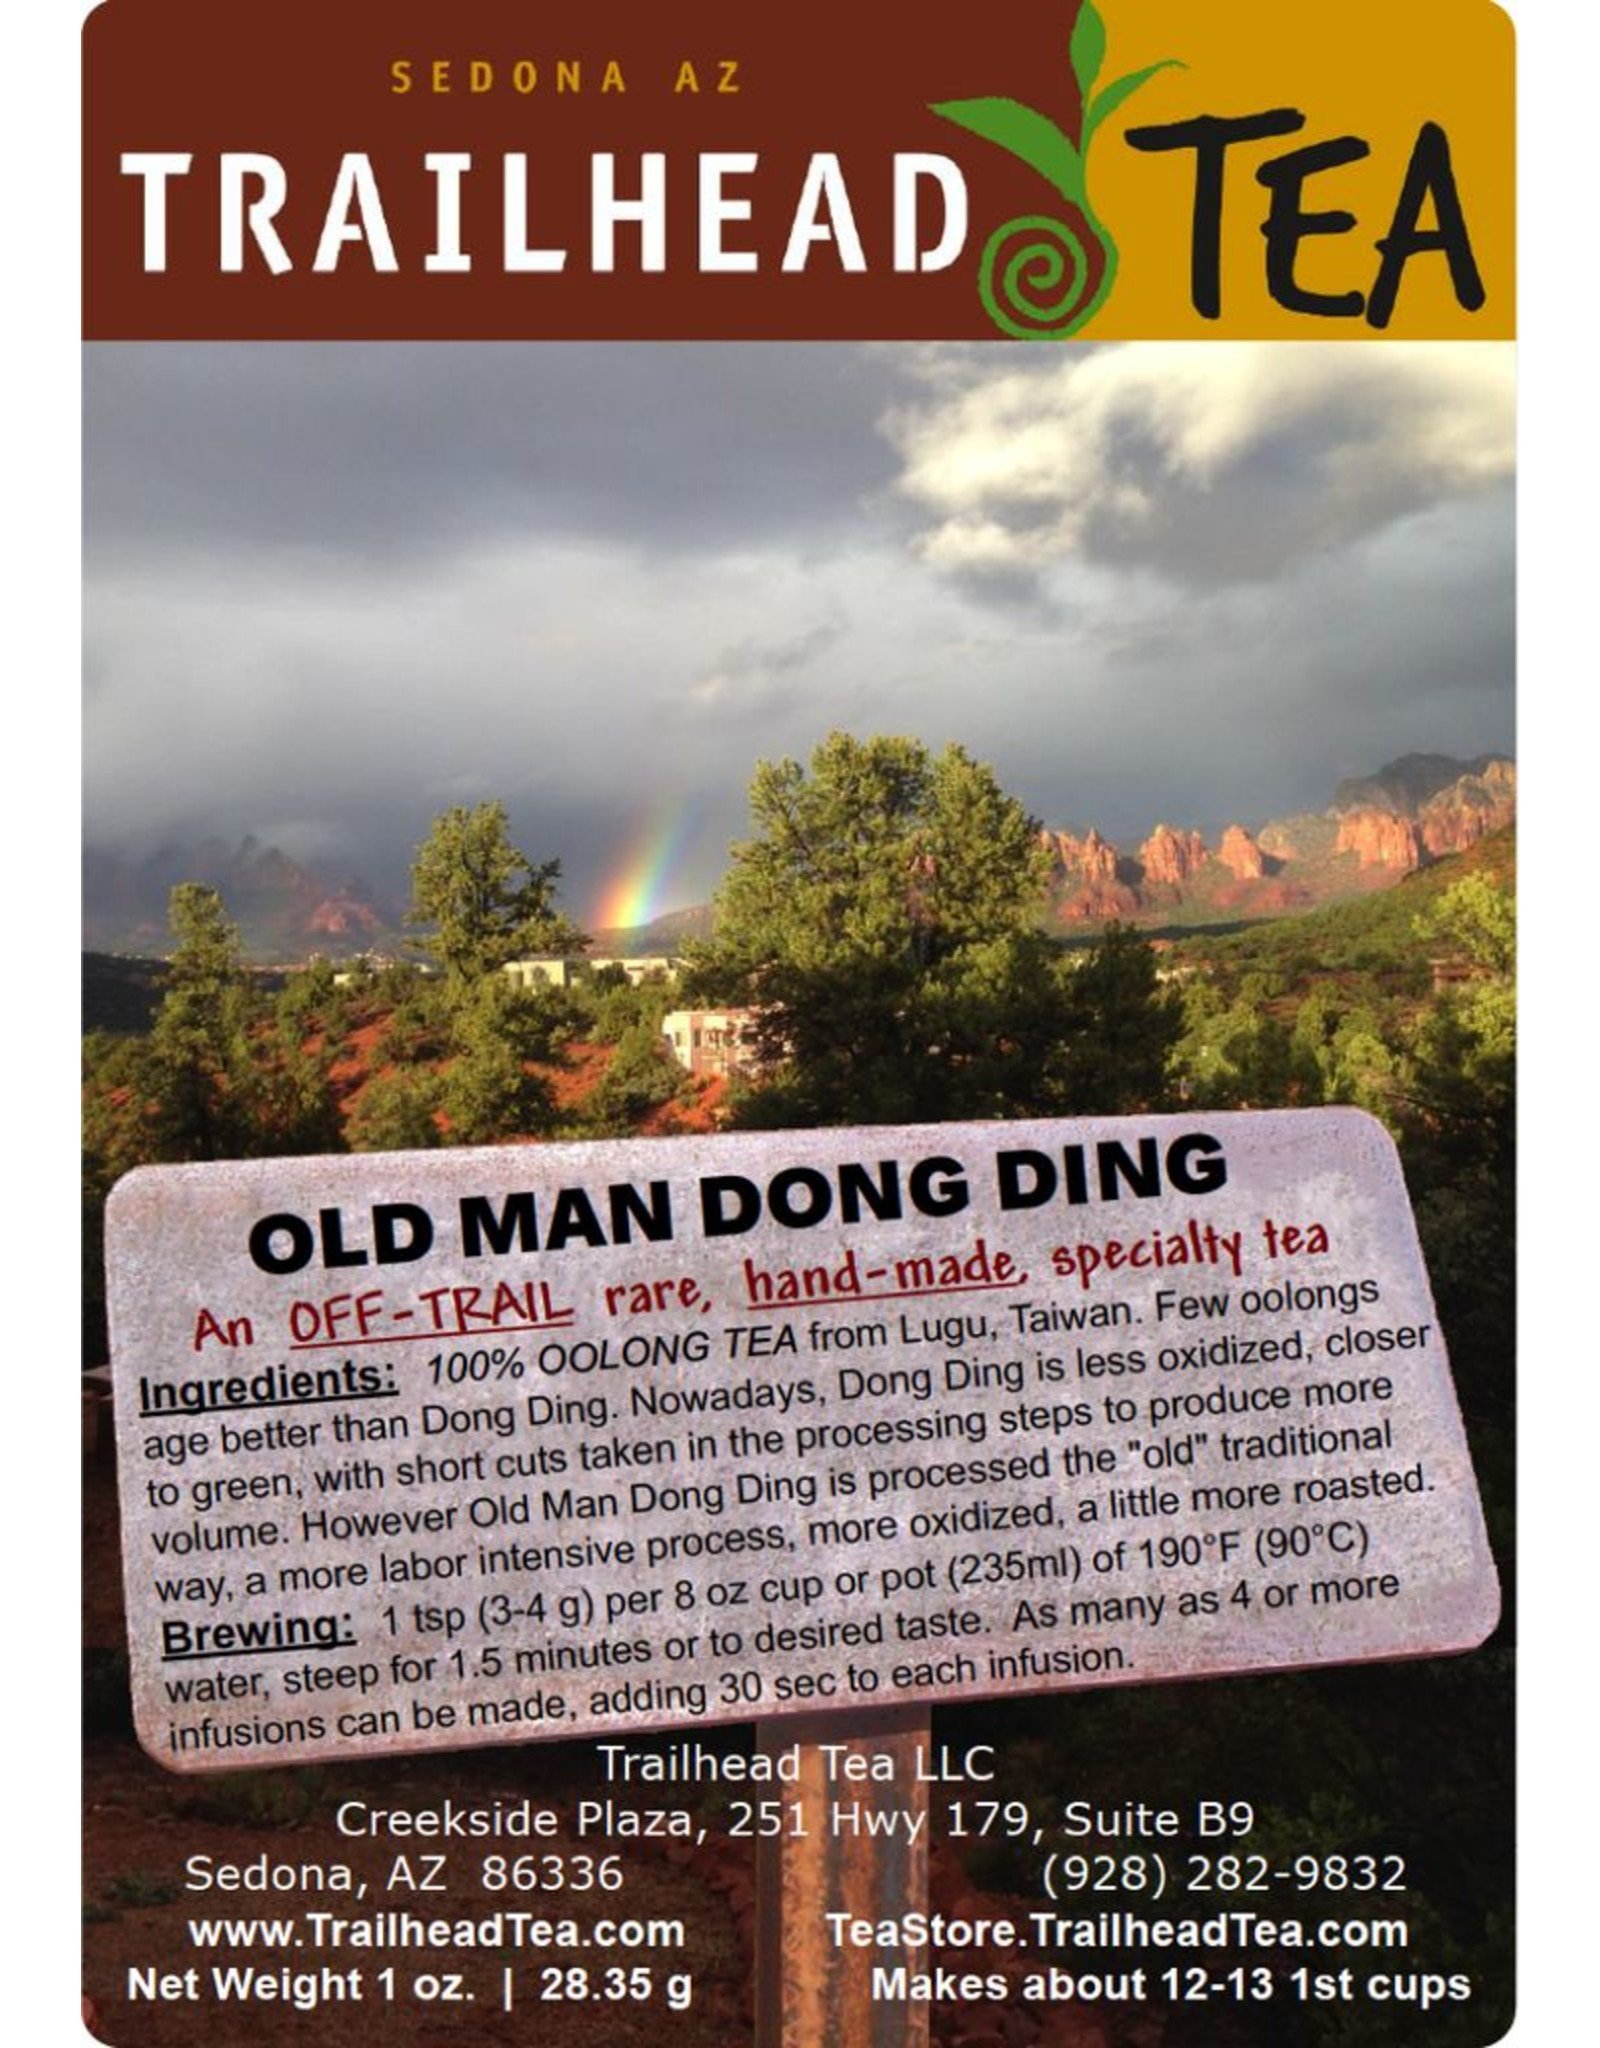 Off-Trail-Rare Old Man Dong Ding (Off-Trail Oolong)